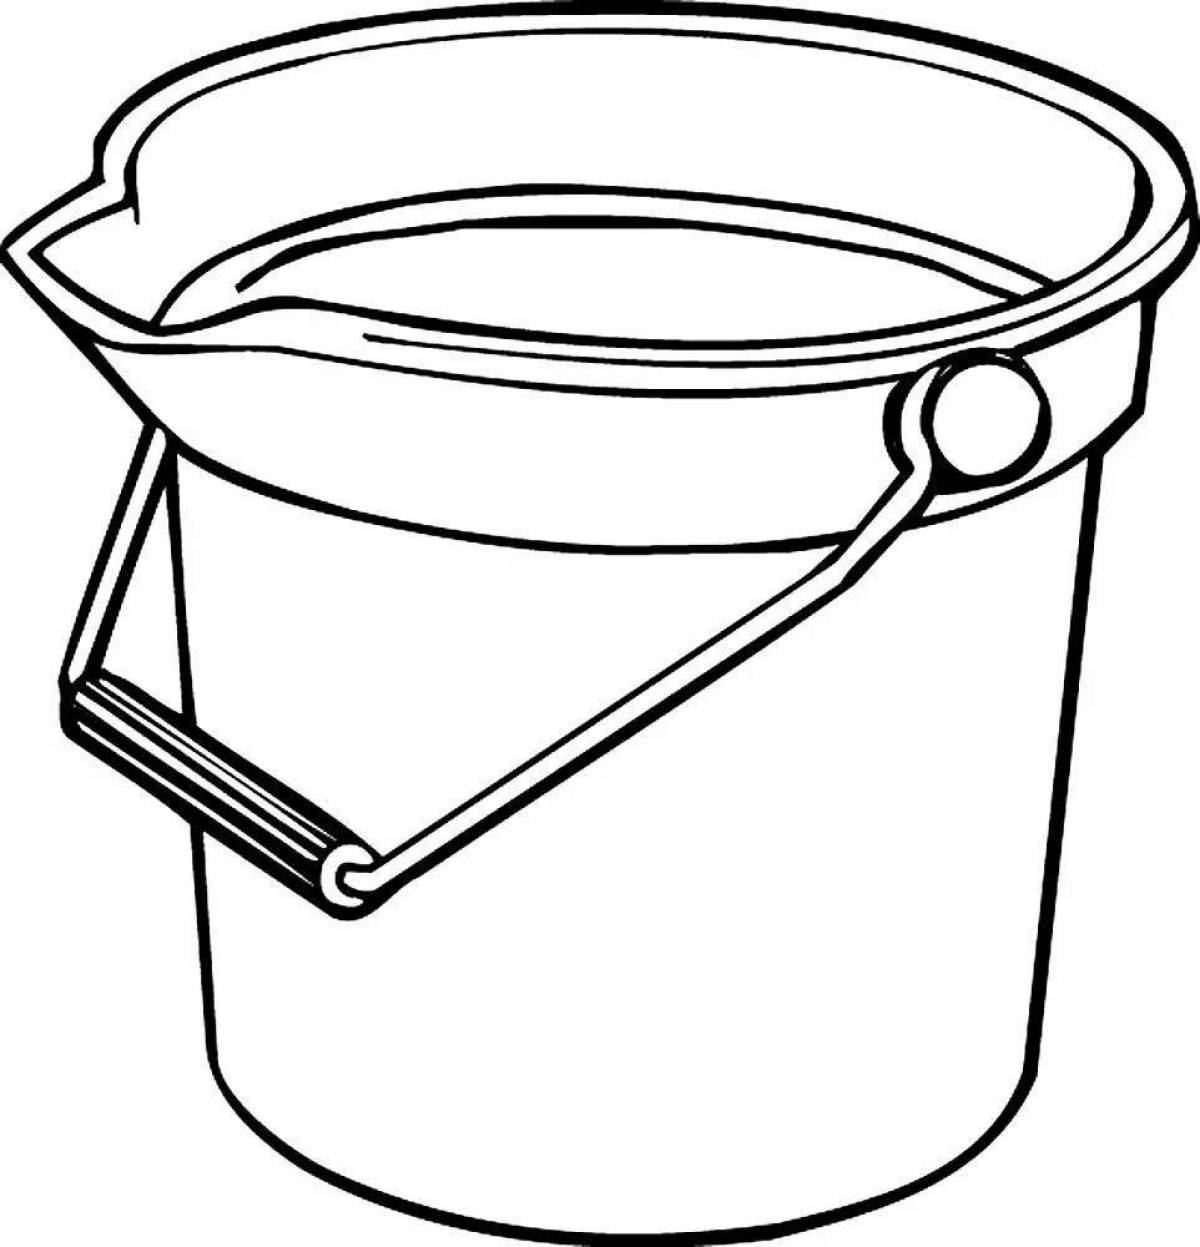 Cute Bucket Coloring Page for Toddlers